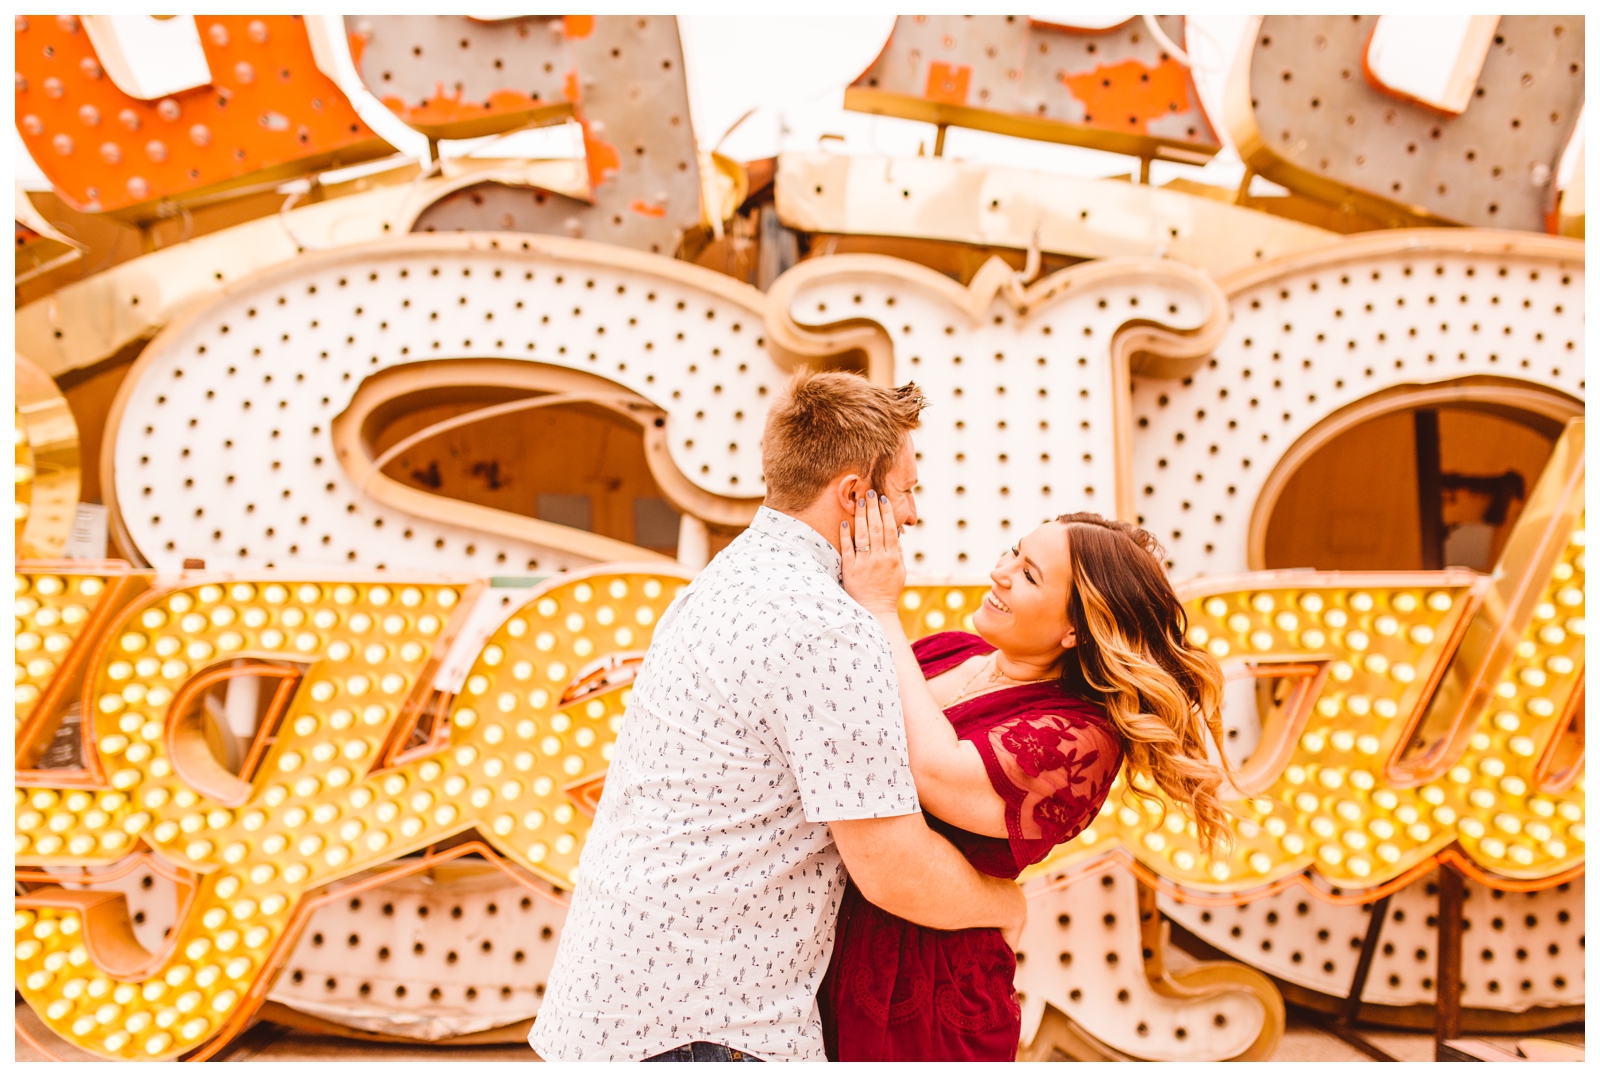 Bright & Quirky Neon Museum Engagement Shoot - Las Vegas, Nevada - Brooke Michelle Photography